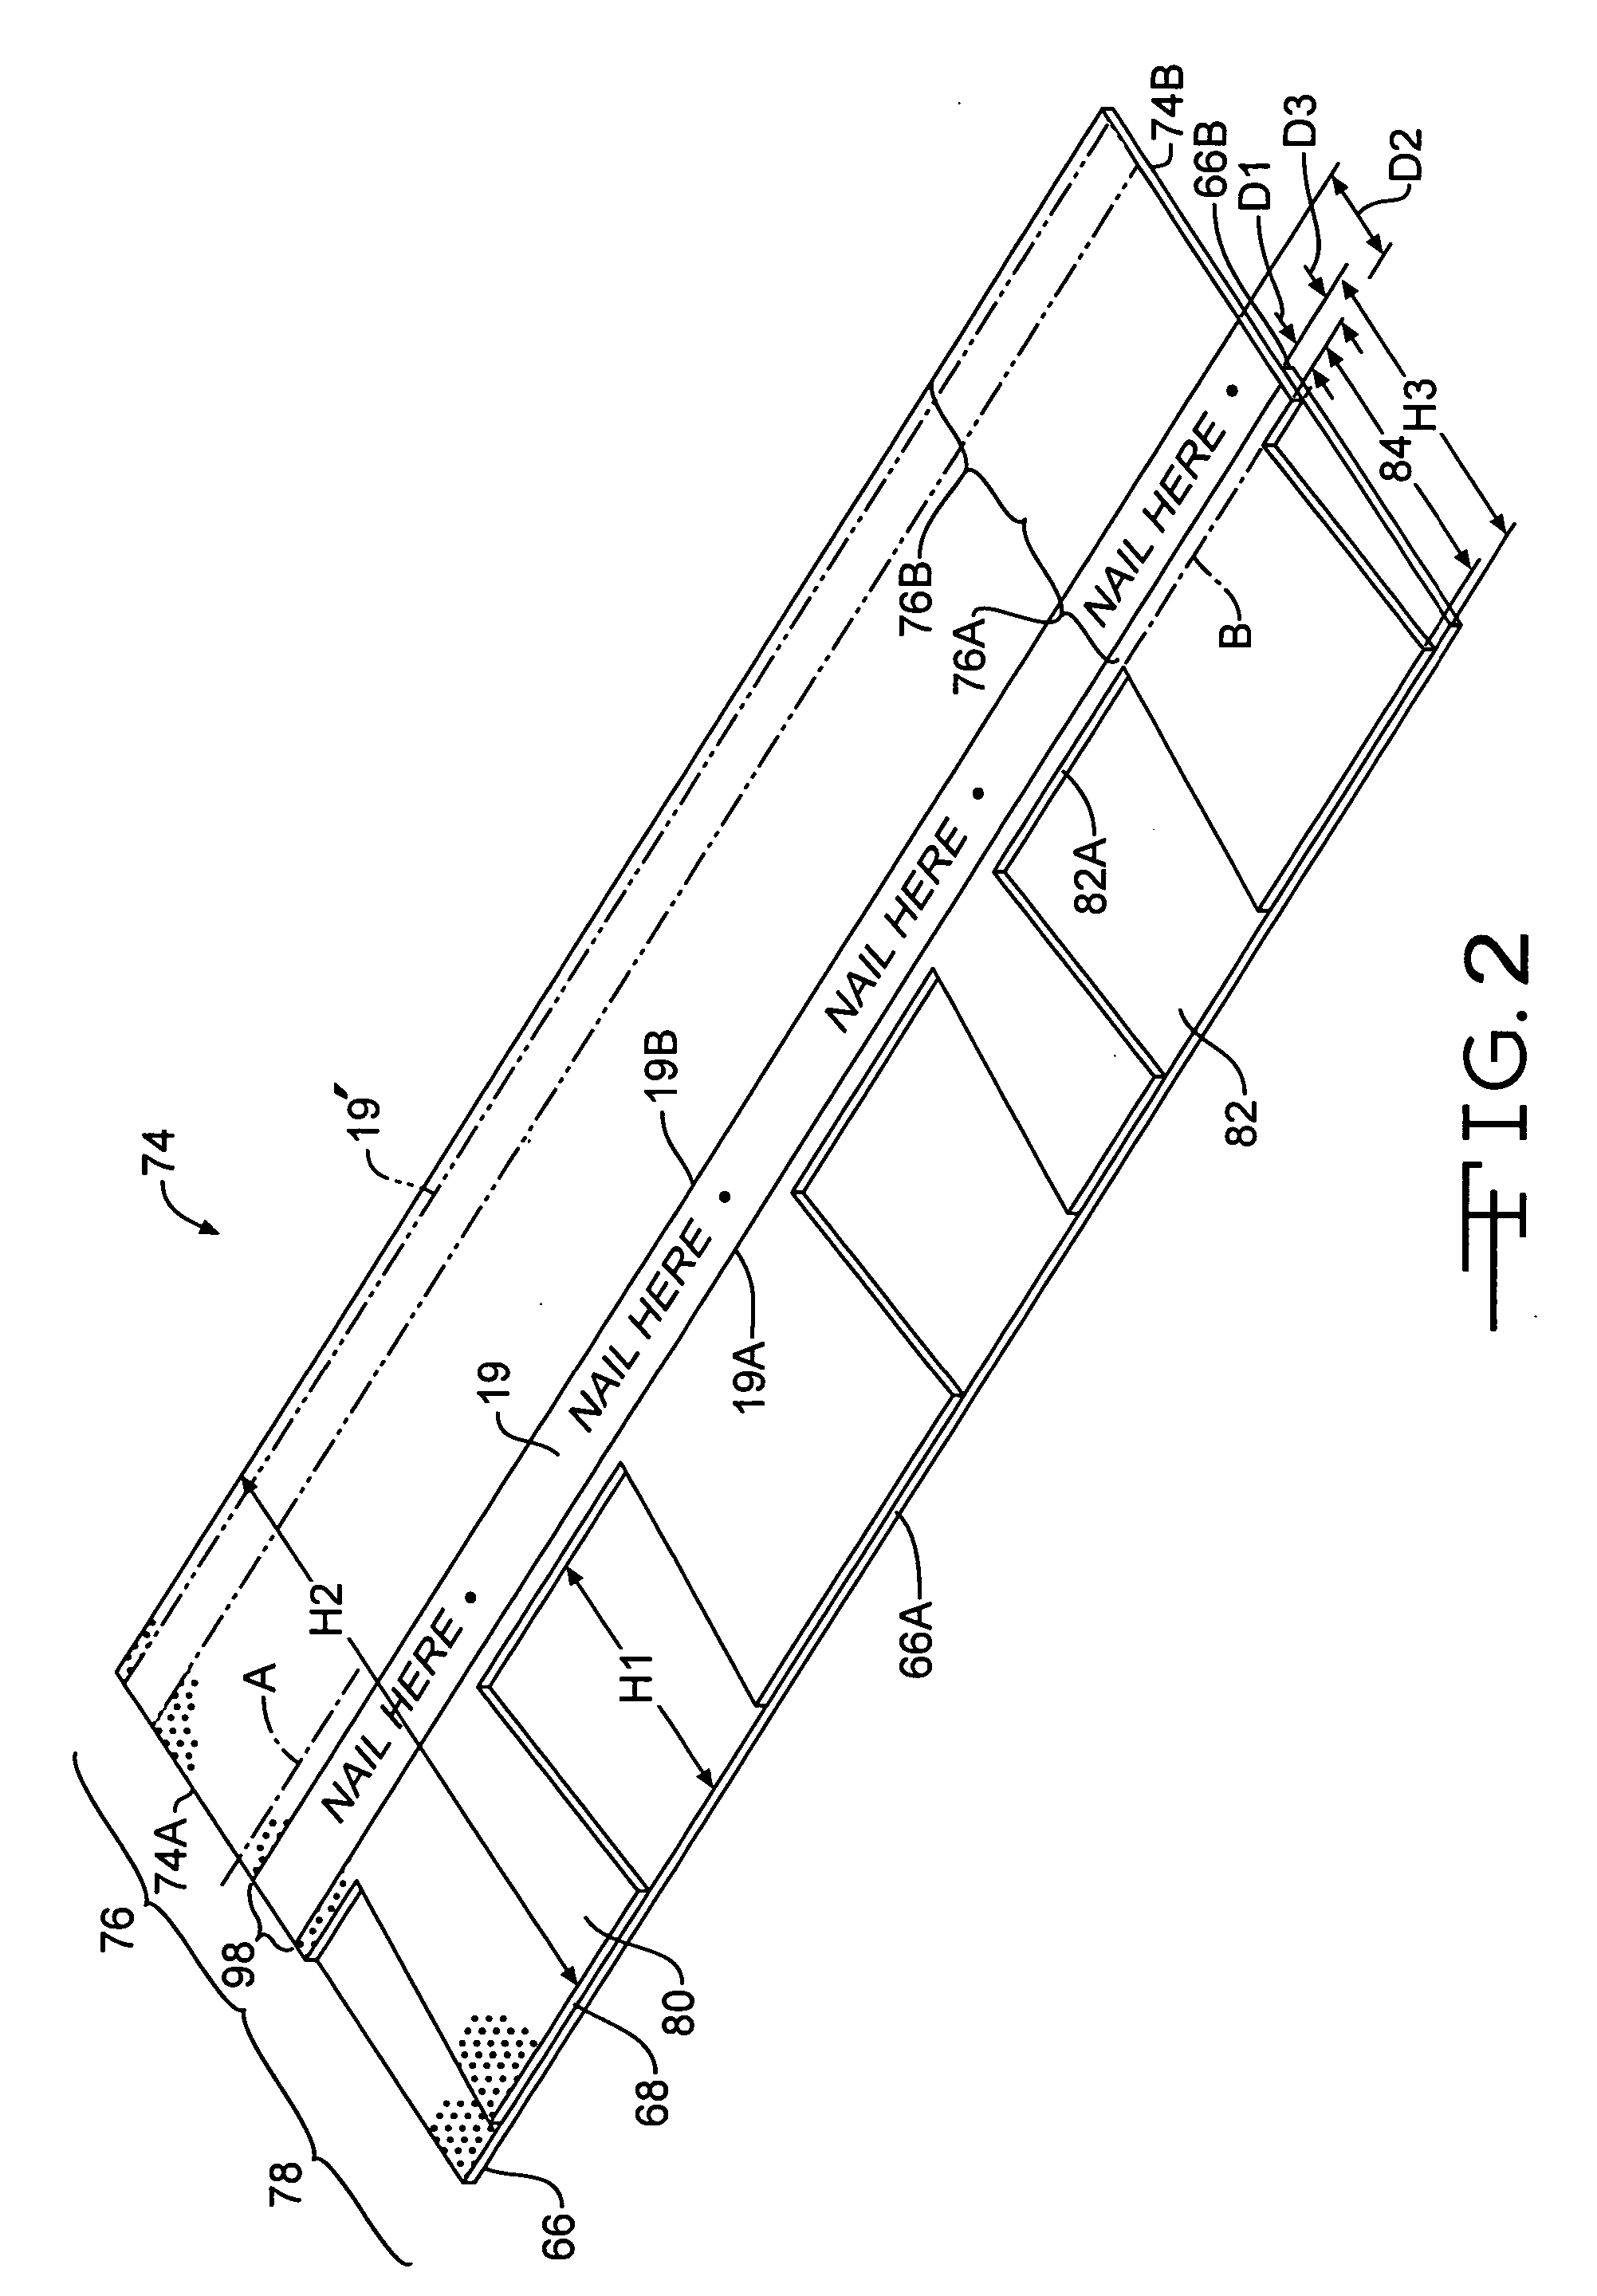 Shingle with reinforced nail zone and method of manufacturing